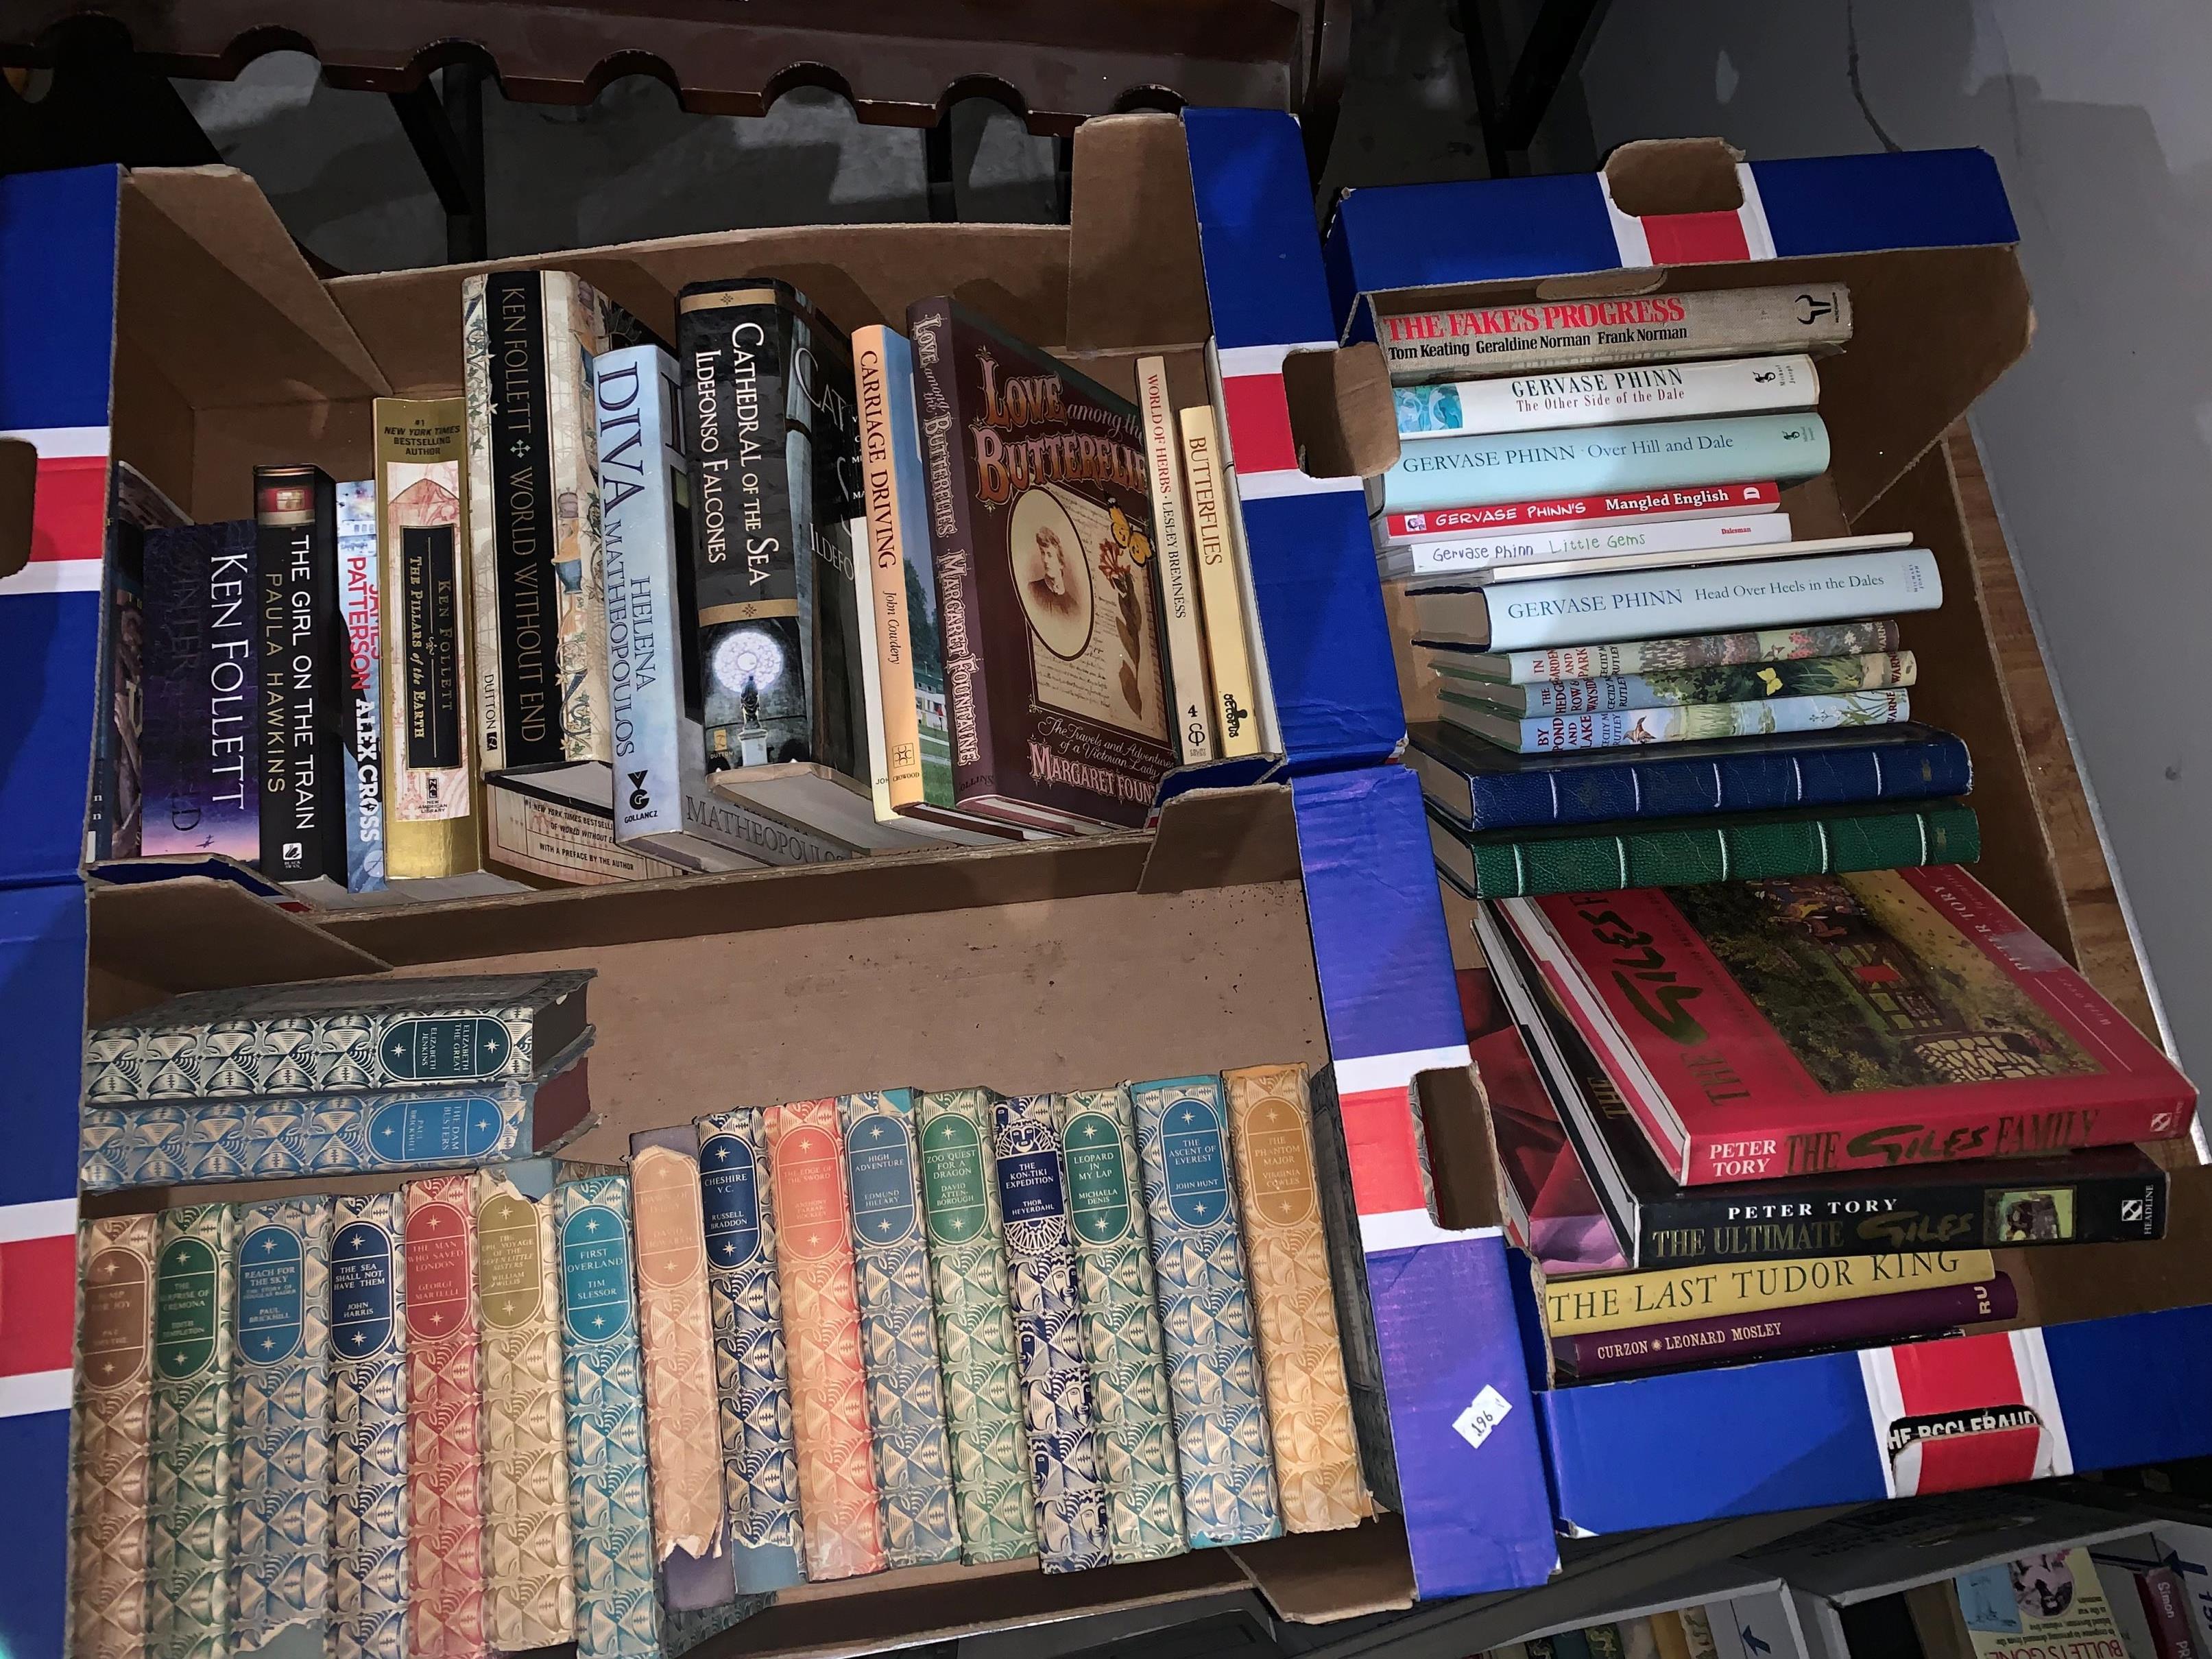 Contents to 3 boxes - Companion Book Club novels, Giles comedy books, novels by Gervase Phinn, etc.